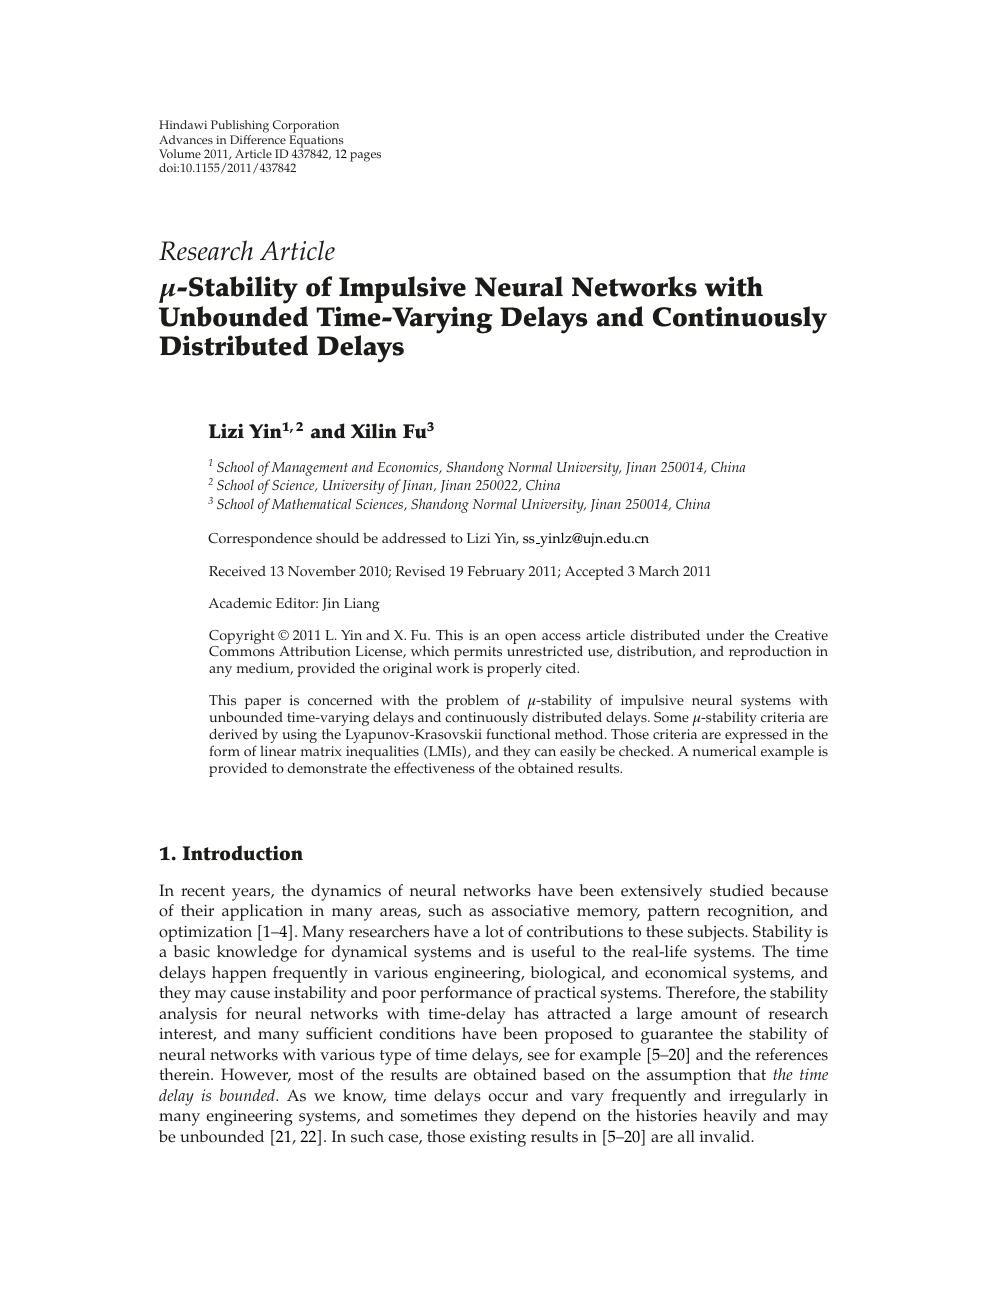 M Stability Of Impulsive Neural Networks With Unbounded Time Varying Delays And Continuously Distributed Delays Topic Of Research Paper In Mathematics Download Scholarly Article Pdf And Read For Free On Cyberleninka Open Science